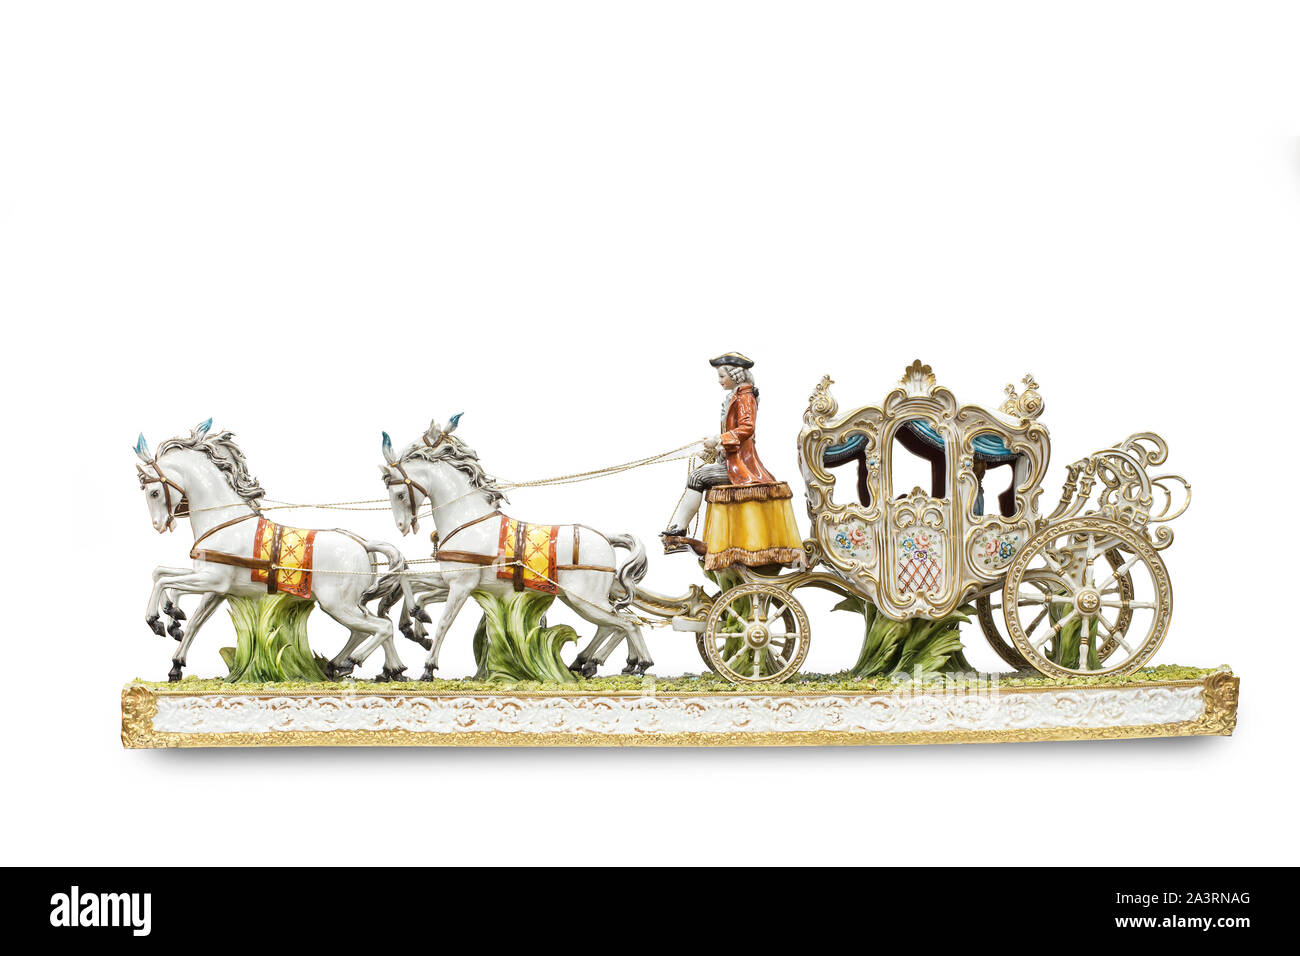 porcelain figurines of horse carriage on white background (with clipping path). Stock Photo